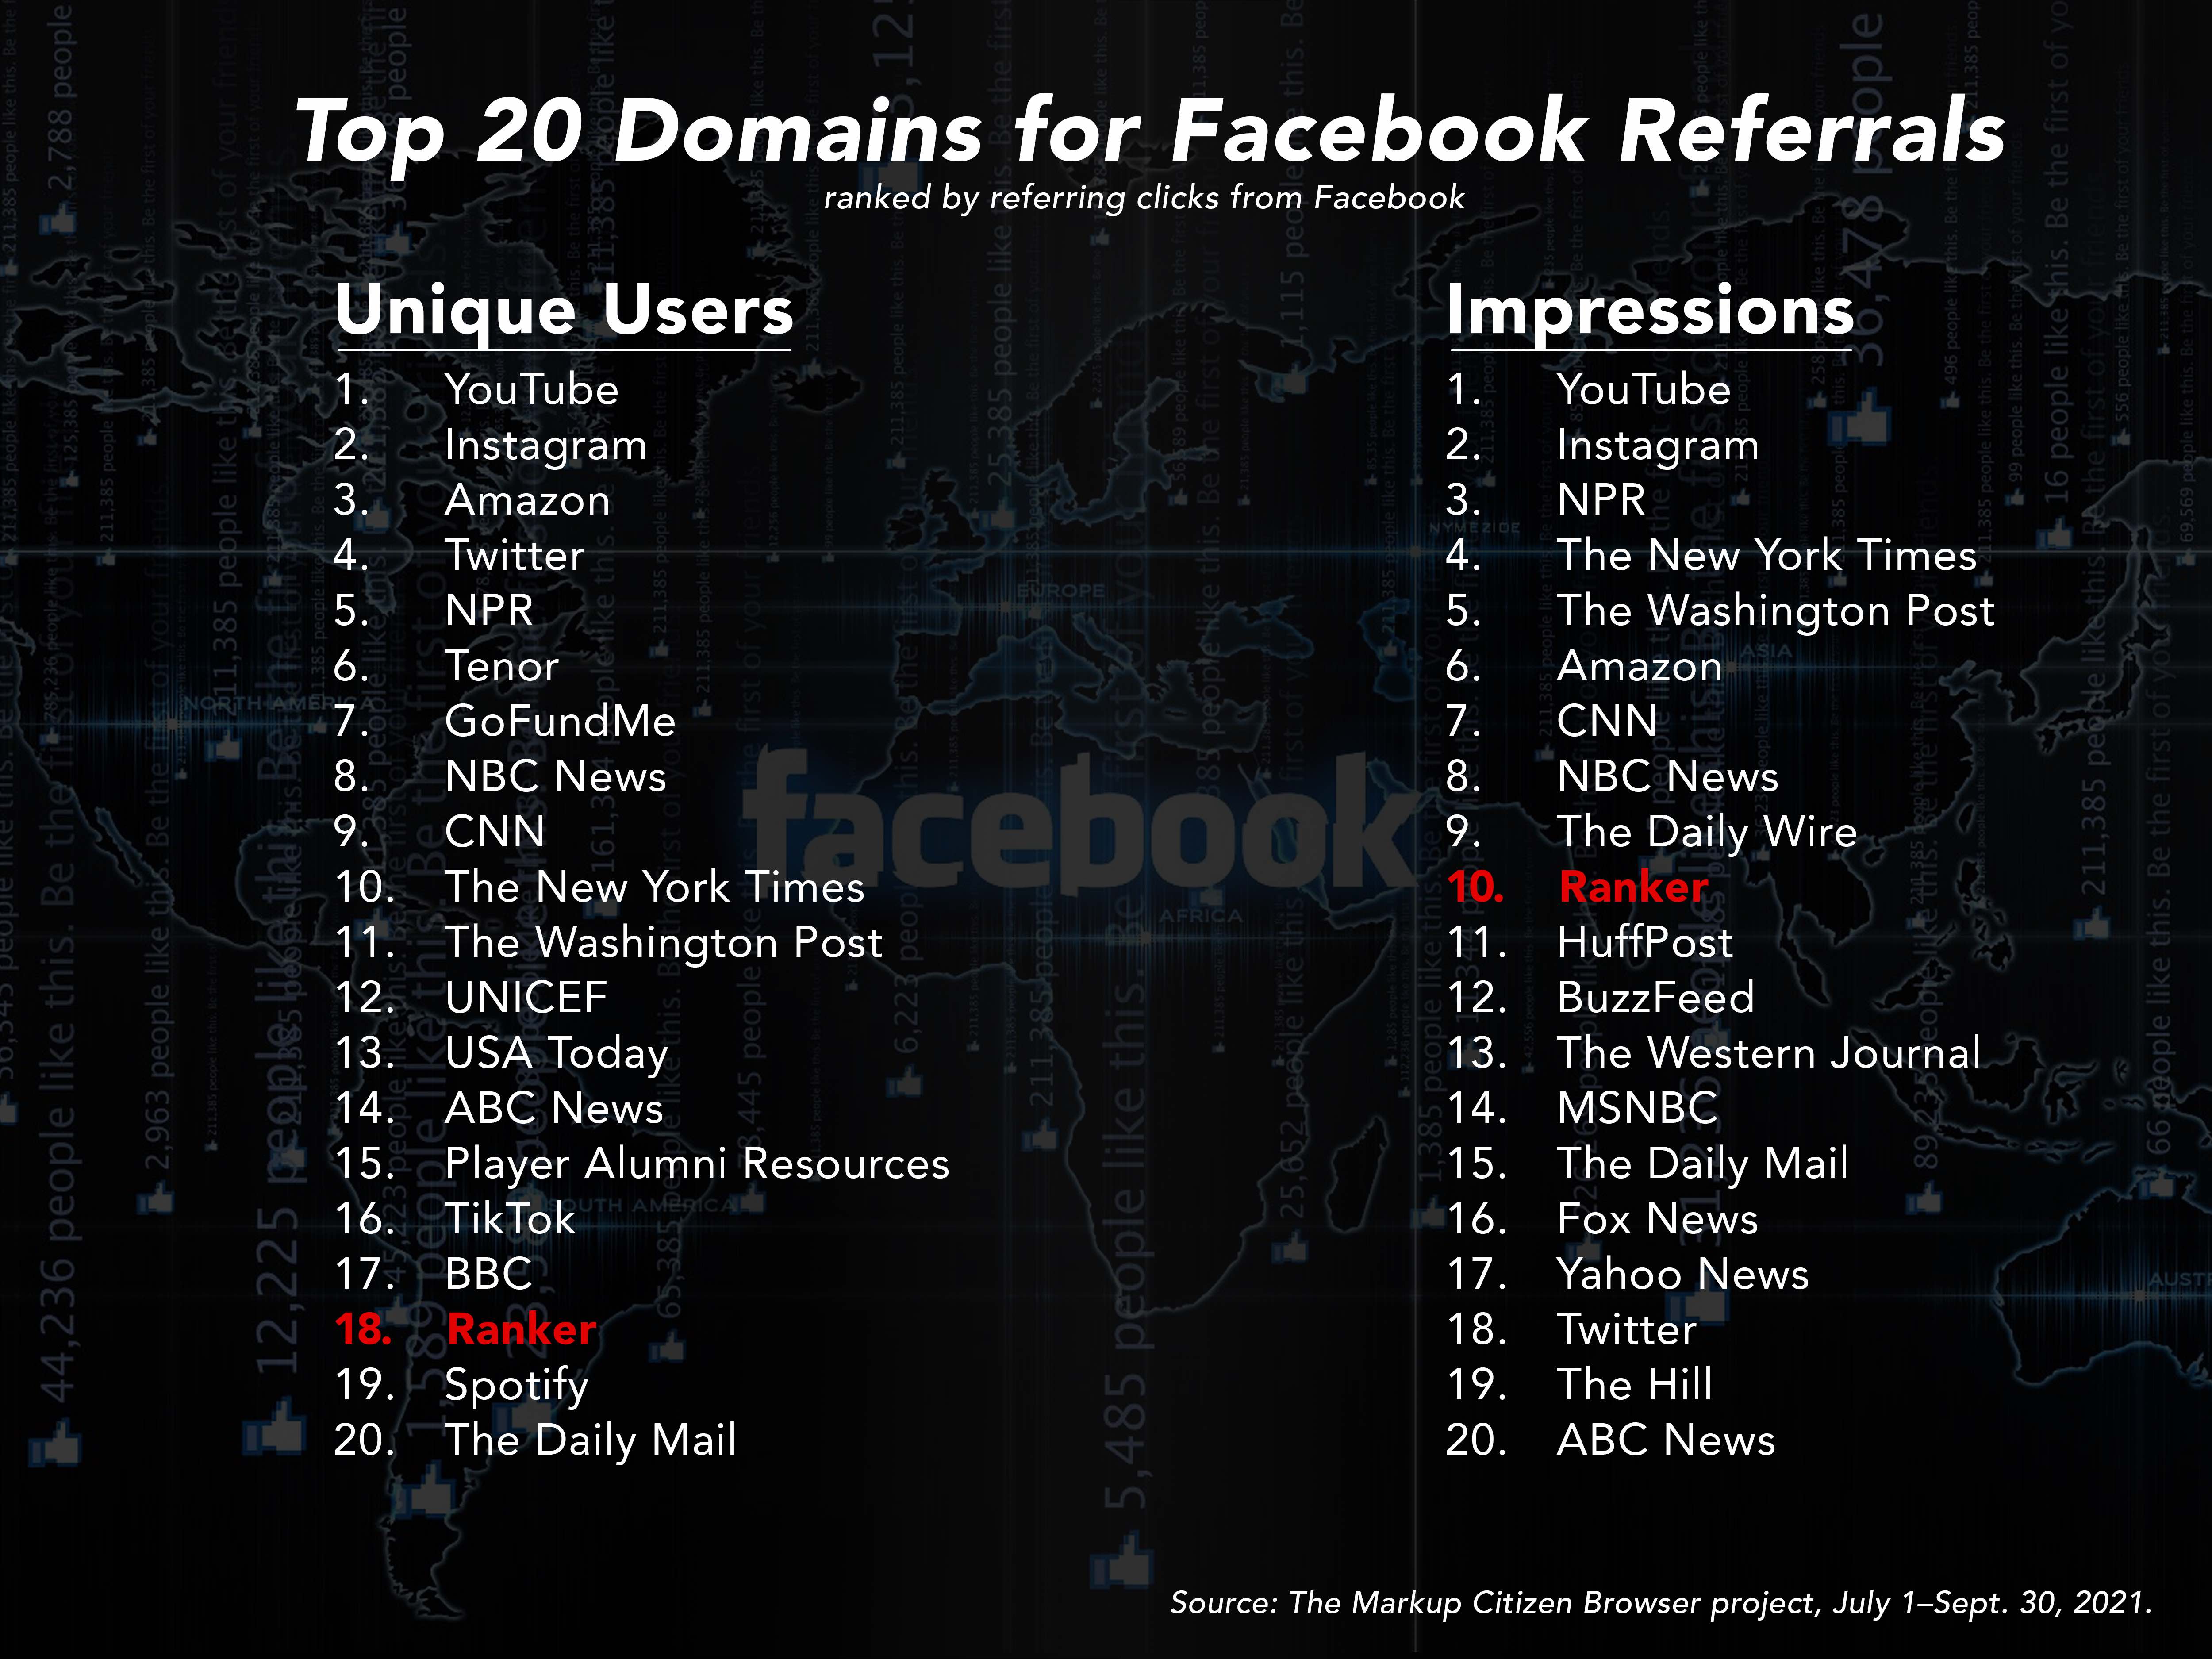 Top 20 Domains for Facebook Referrals